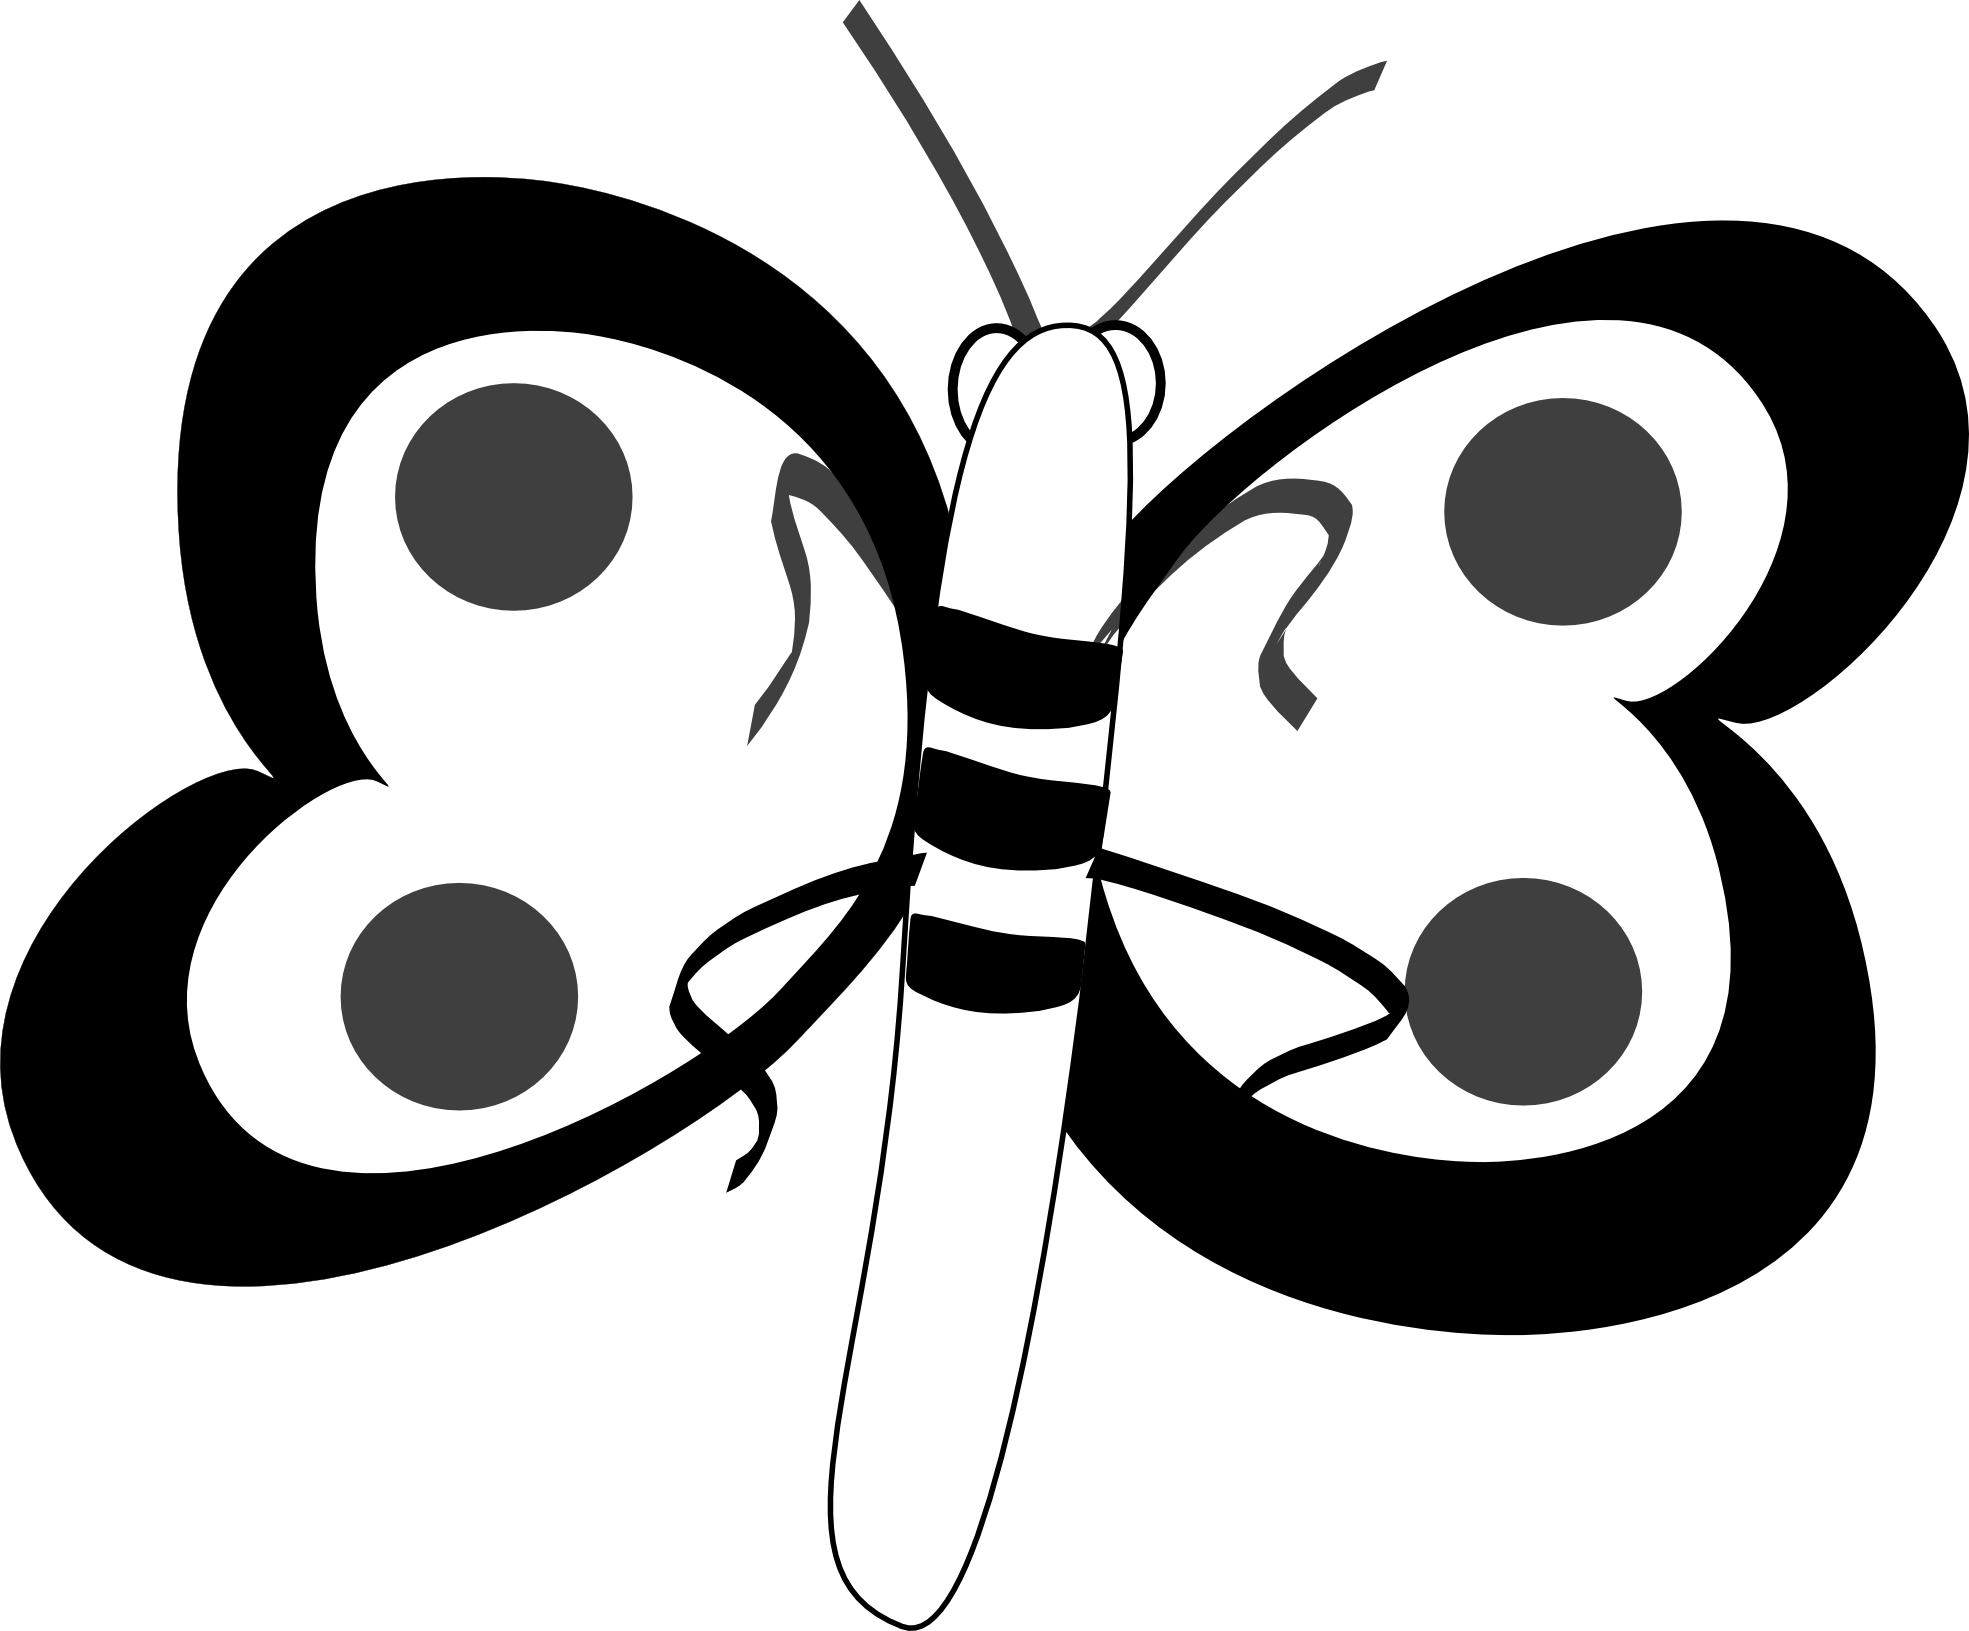 The Black Butterfly - ClipArt Best